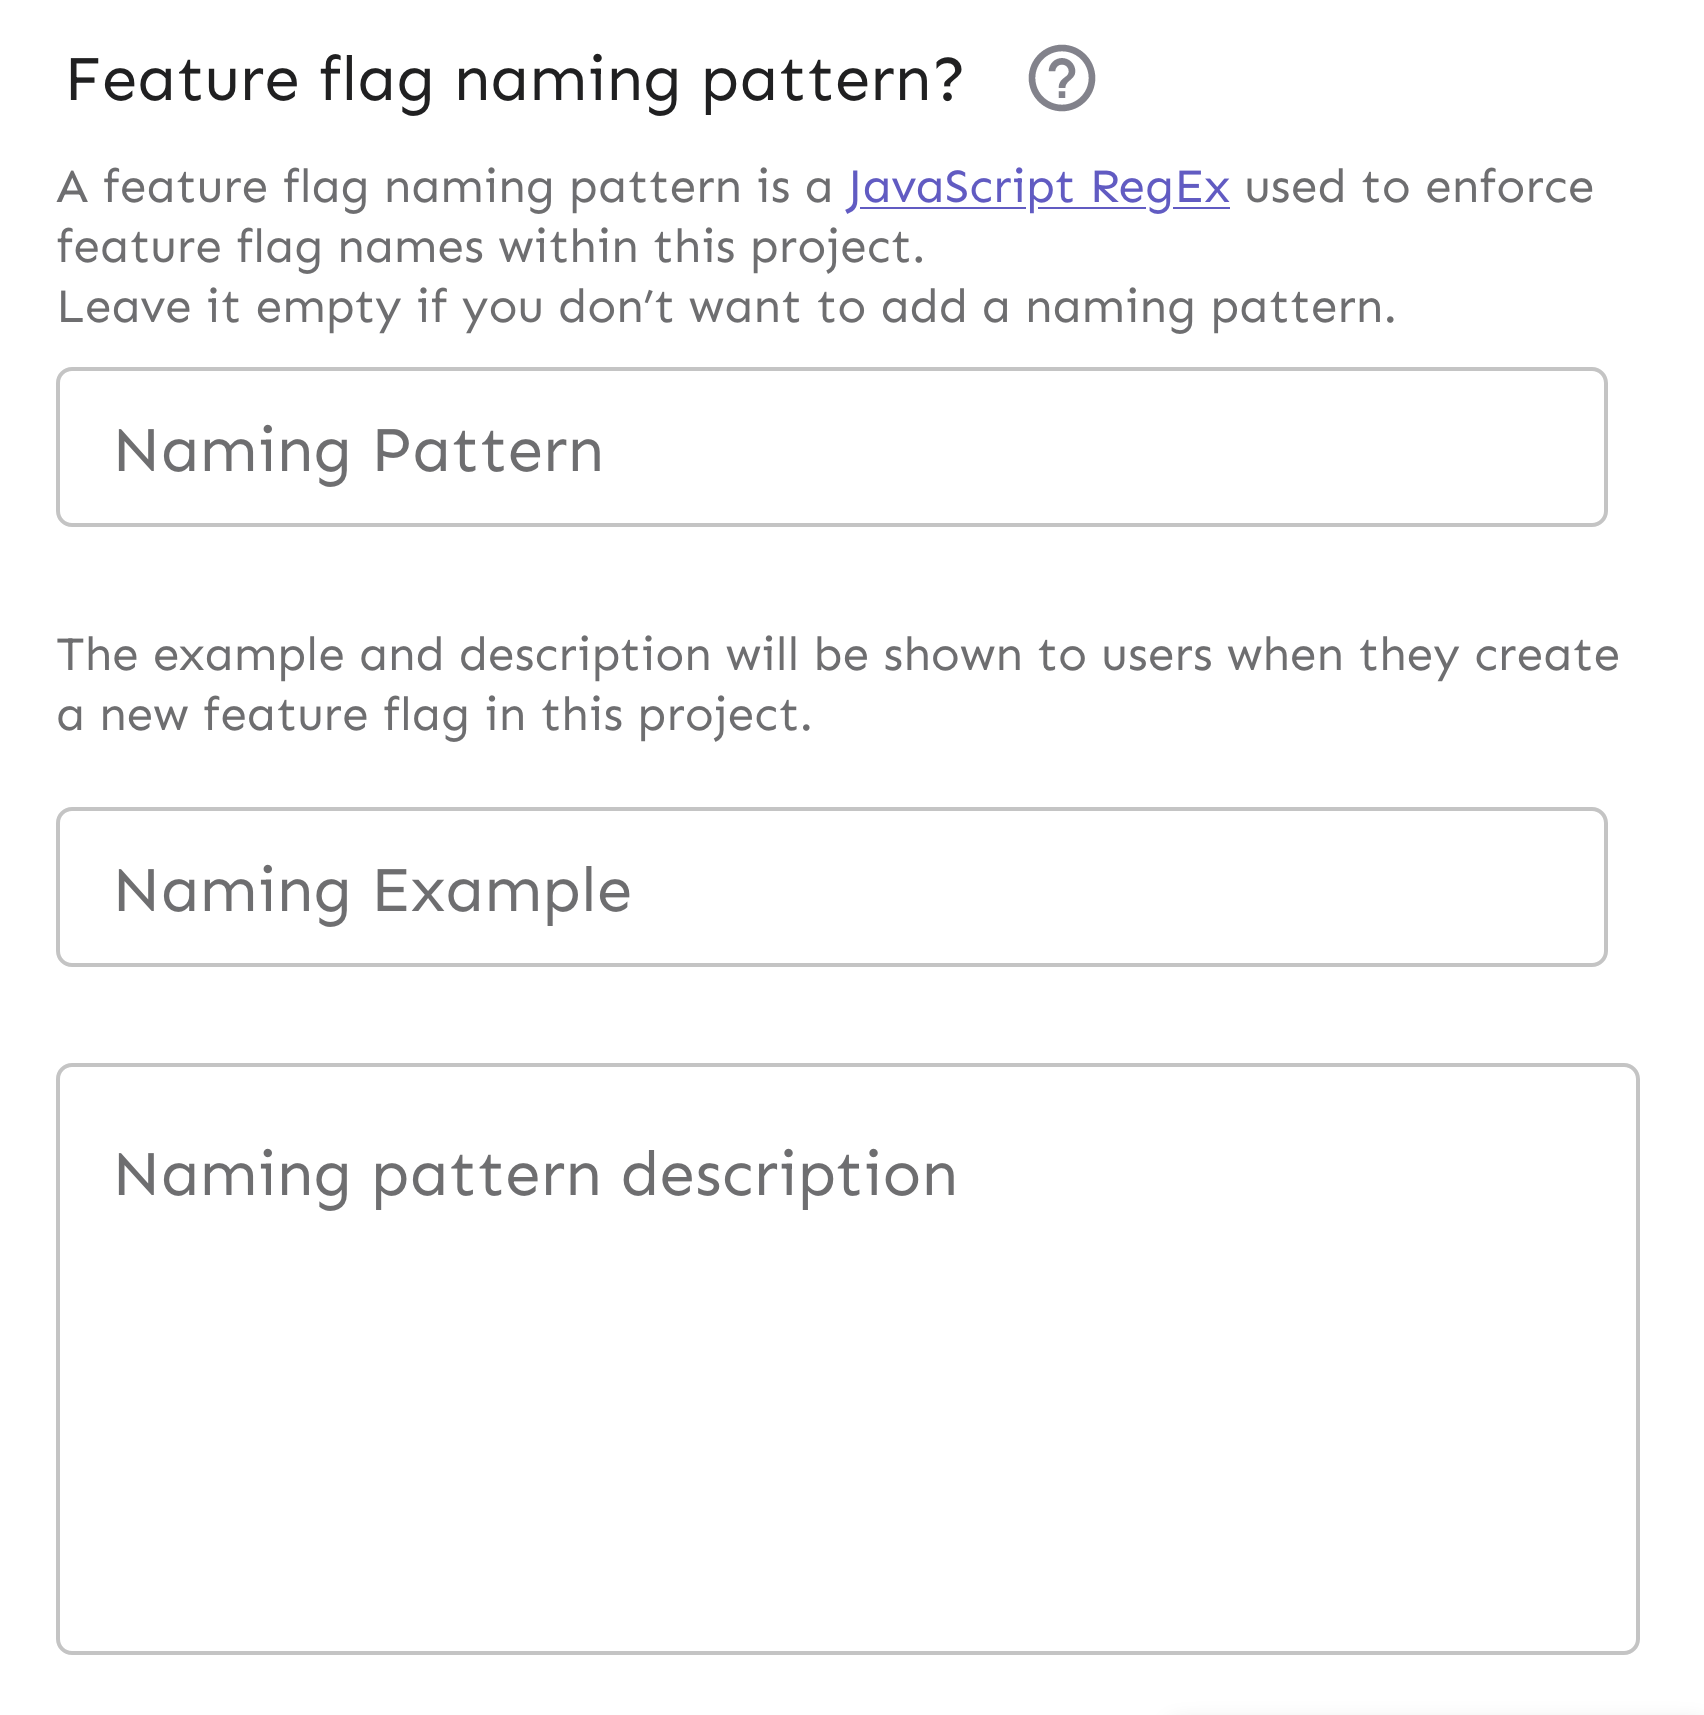 The &quot;feature flag naming pattern&quot; part of the form. Input fields for pattern, example, and description